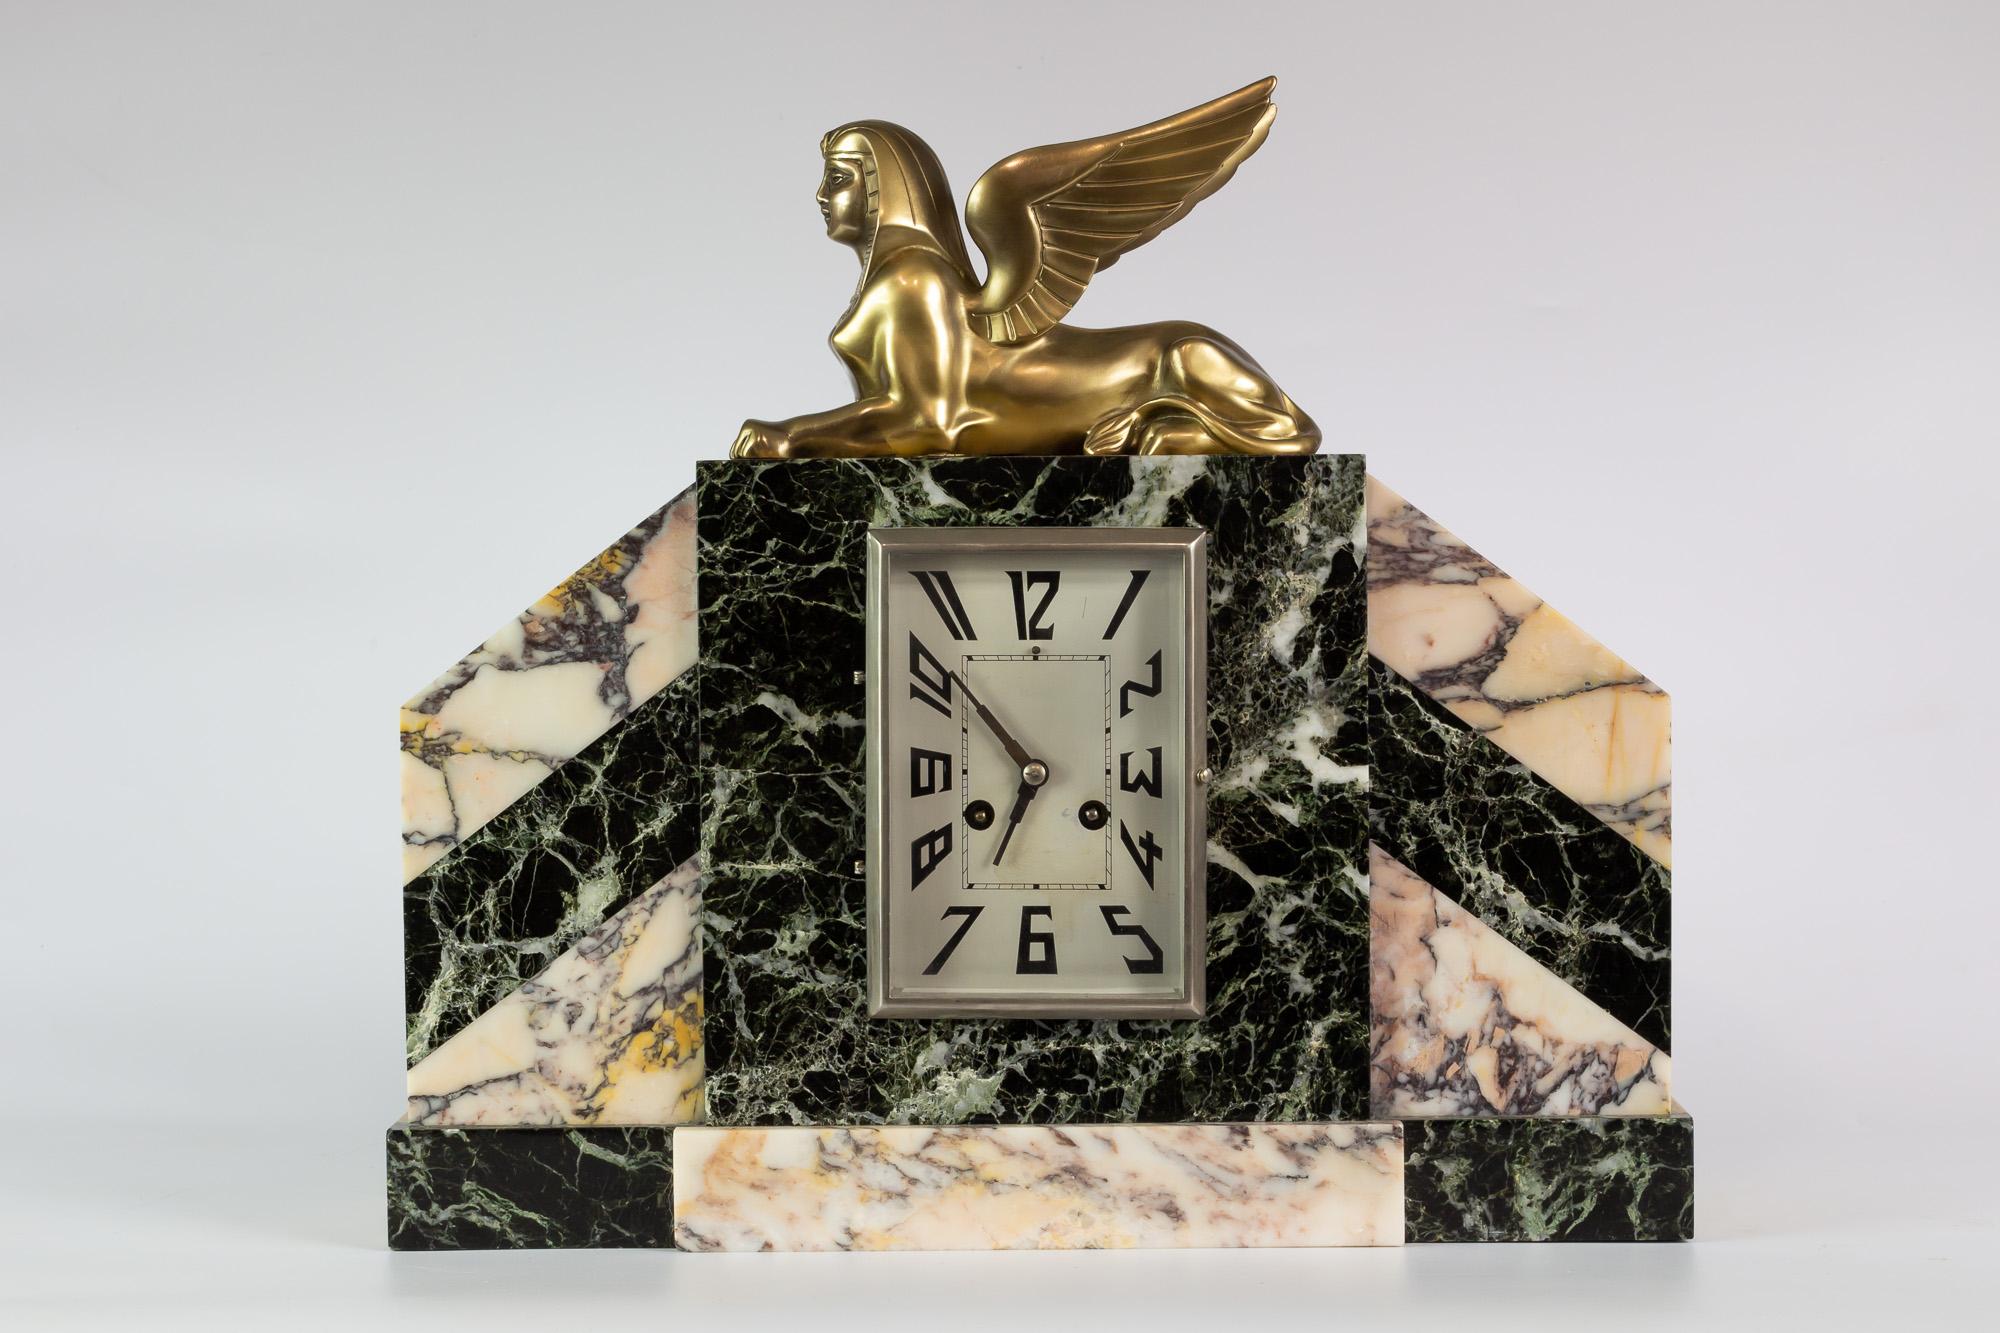 Art deco mantel clock, skyscraper style with garnitures and gilt bronze sphinx.
It is made of marble plates in various shades. Paris Machinery.

Specially good conditions and marble has some typical small cracks due to age. 
The clock works,